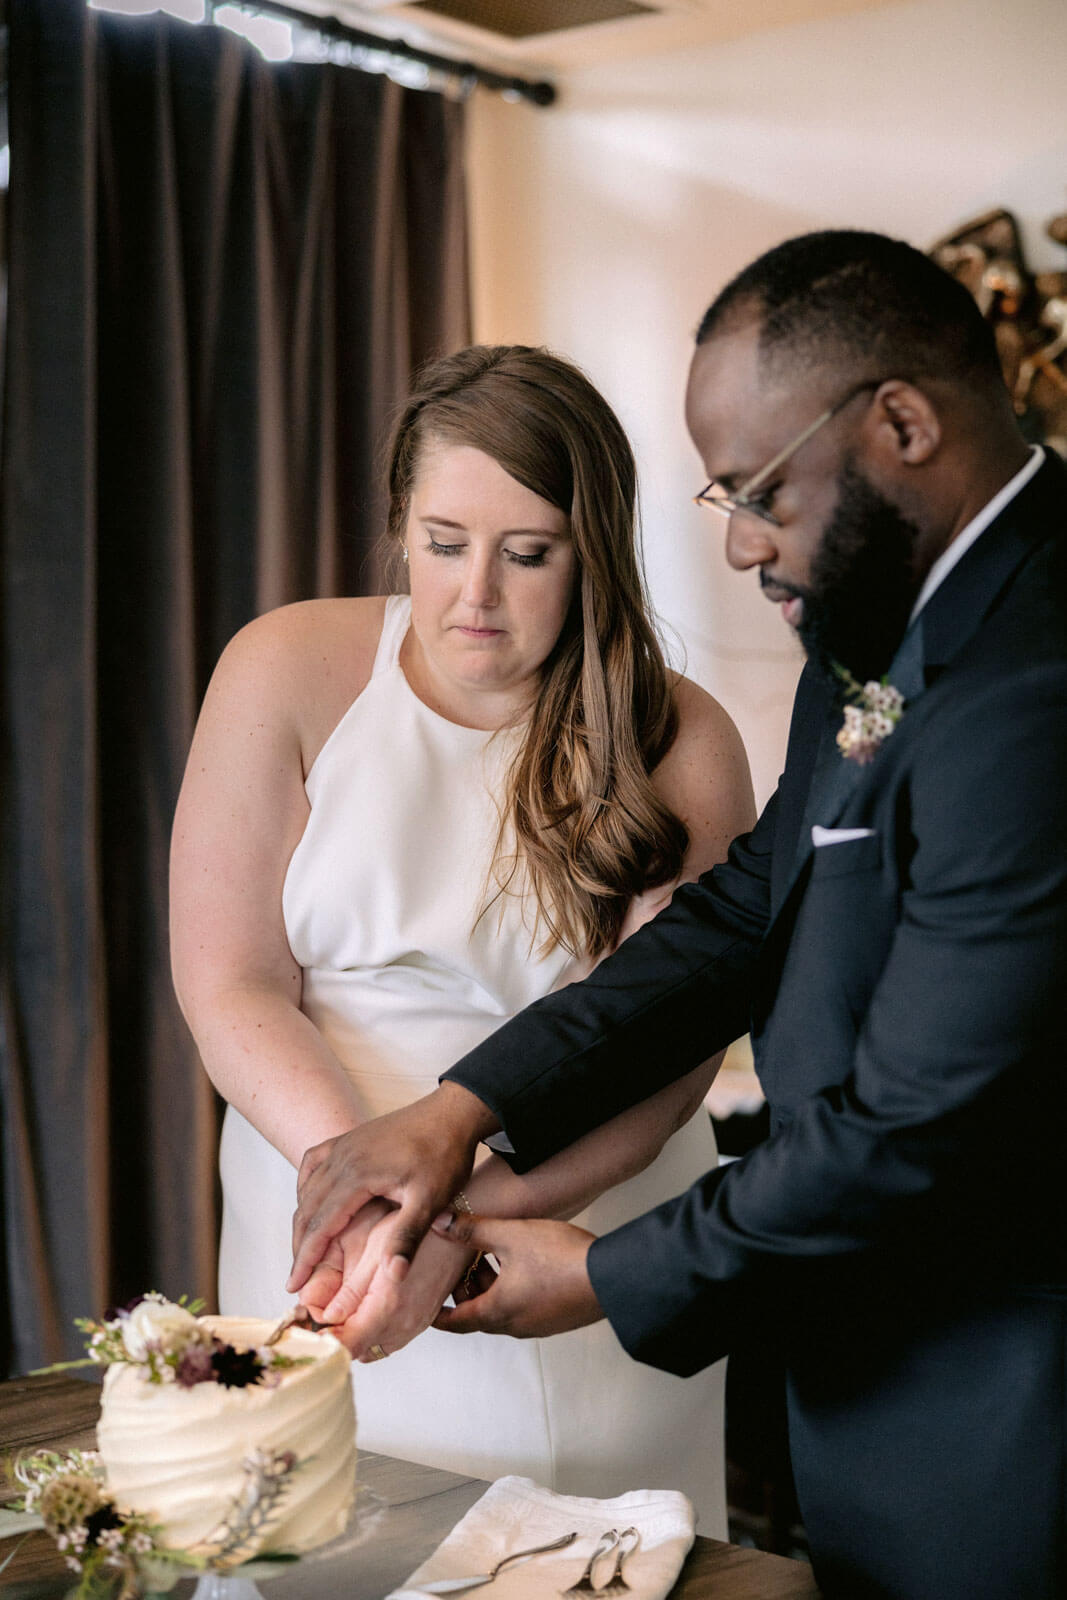 The newlyweds are cutting their small, white wedding cake in New York City. Image by Jenny Fu Studio